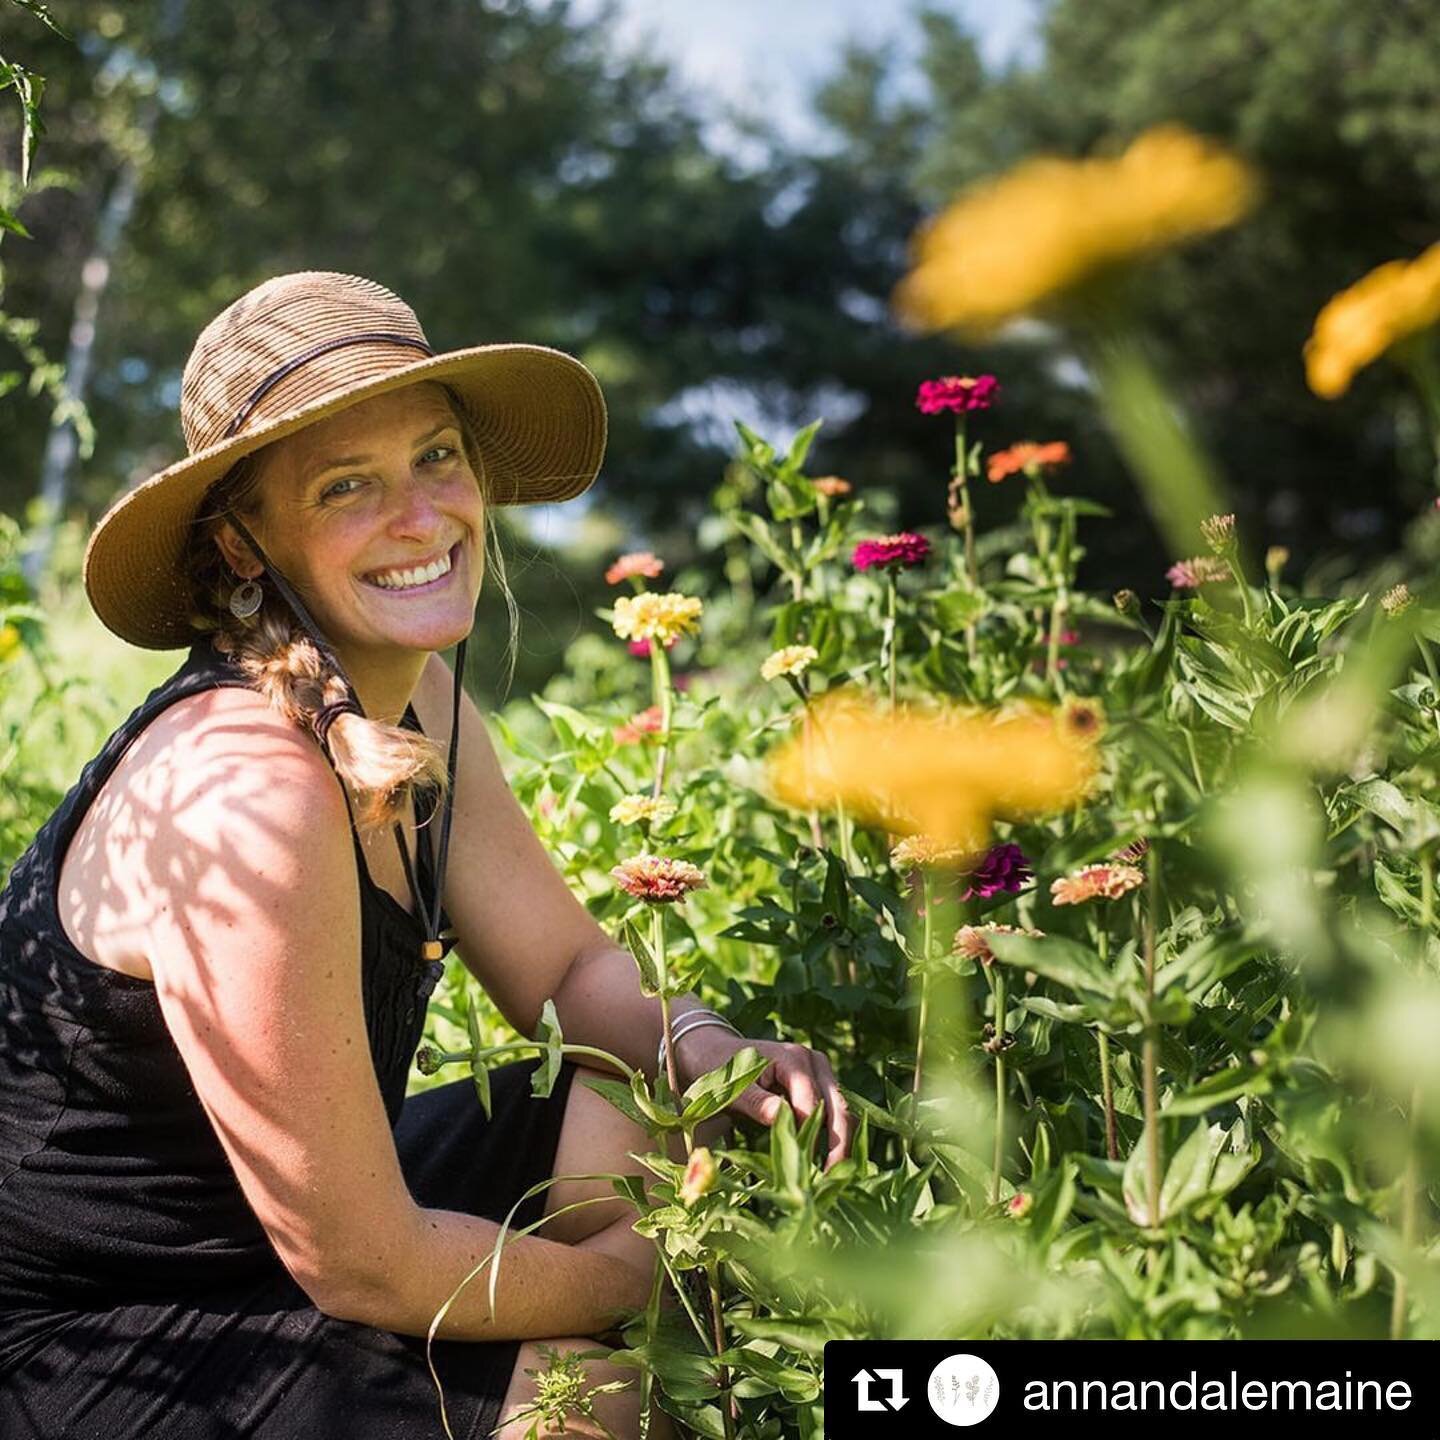 How lucky our Town has been to have @annandalemaine and @1stbedloe at the helm of @pearysgarden, Bowdoinham&rsquo;s community garden project! #Repost @annandalemaine
・・・
Several years ago, I helped start a community garden here in Bowdoinham with @1s